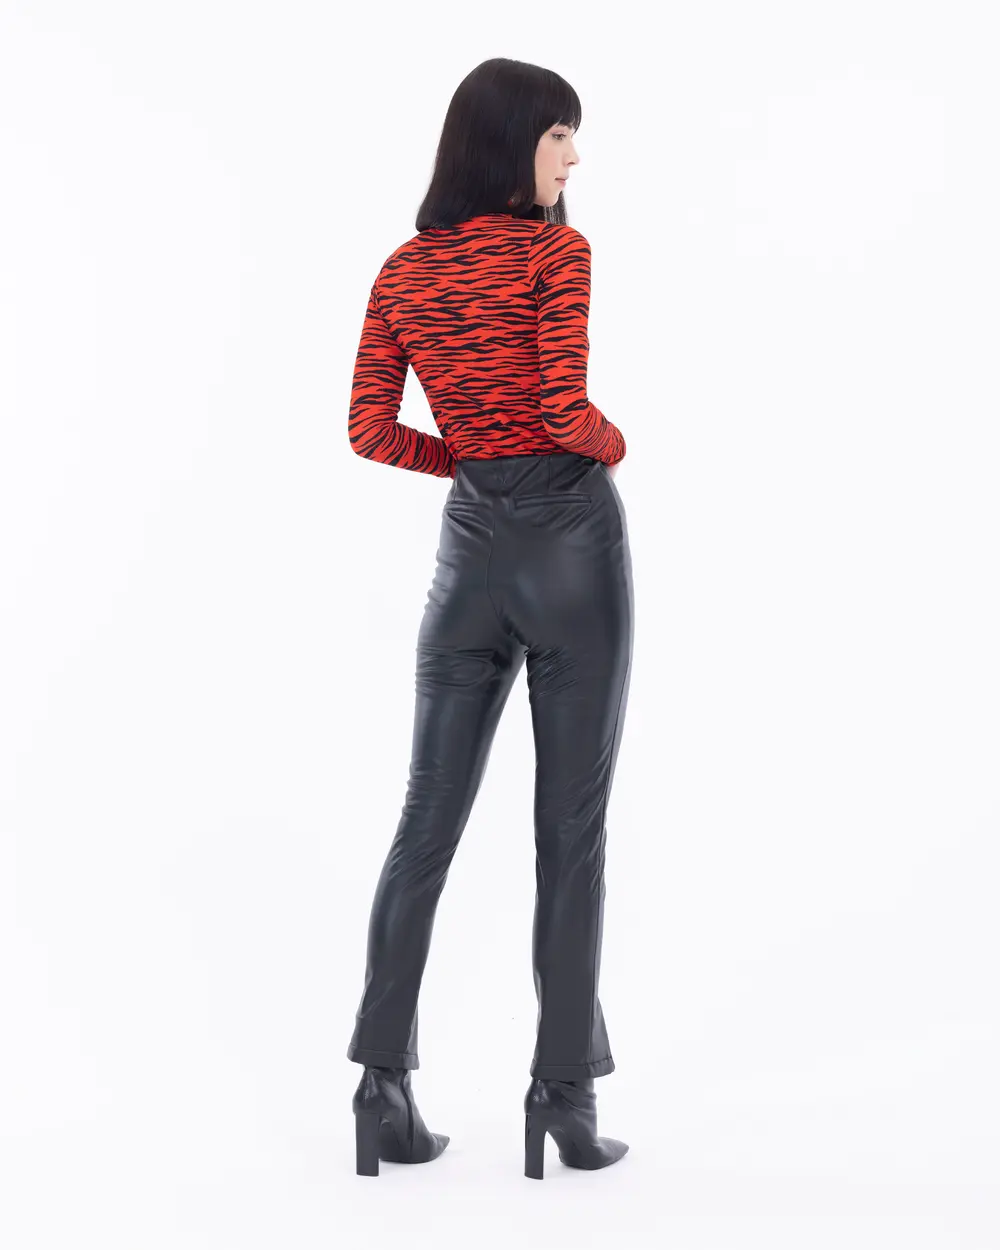 Faux Leather Detailed Leggings Trousers